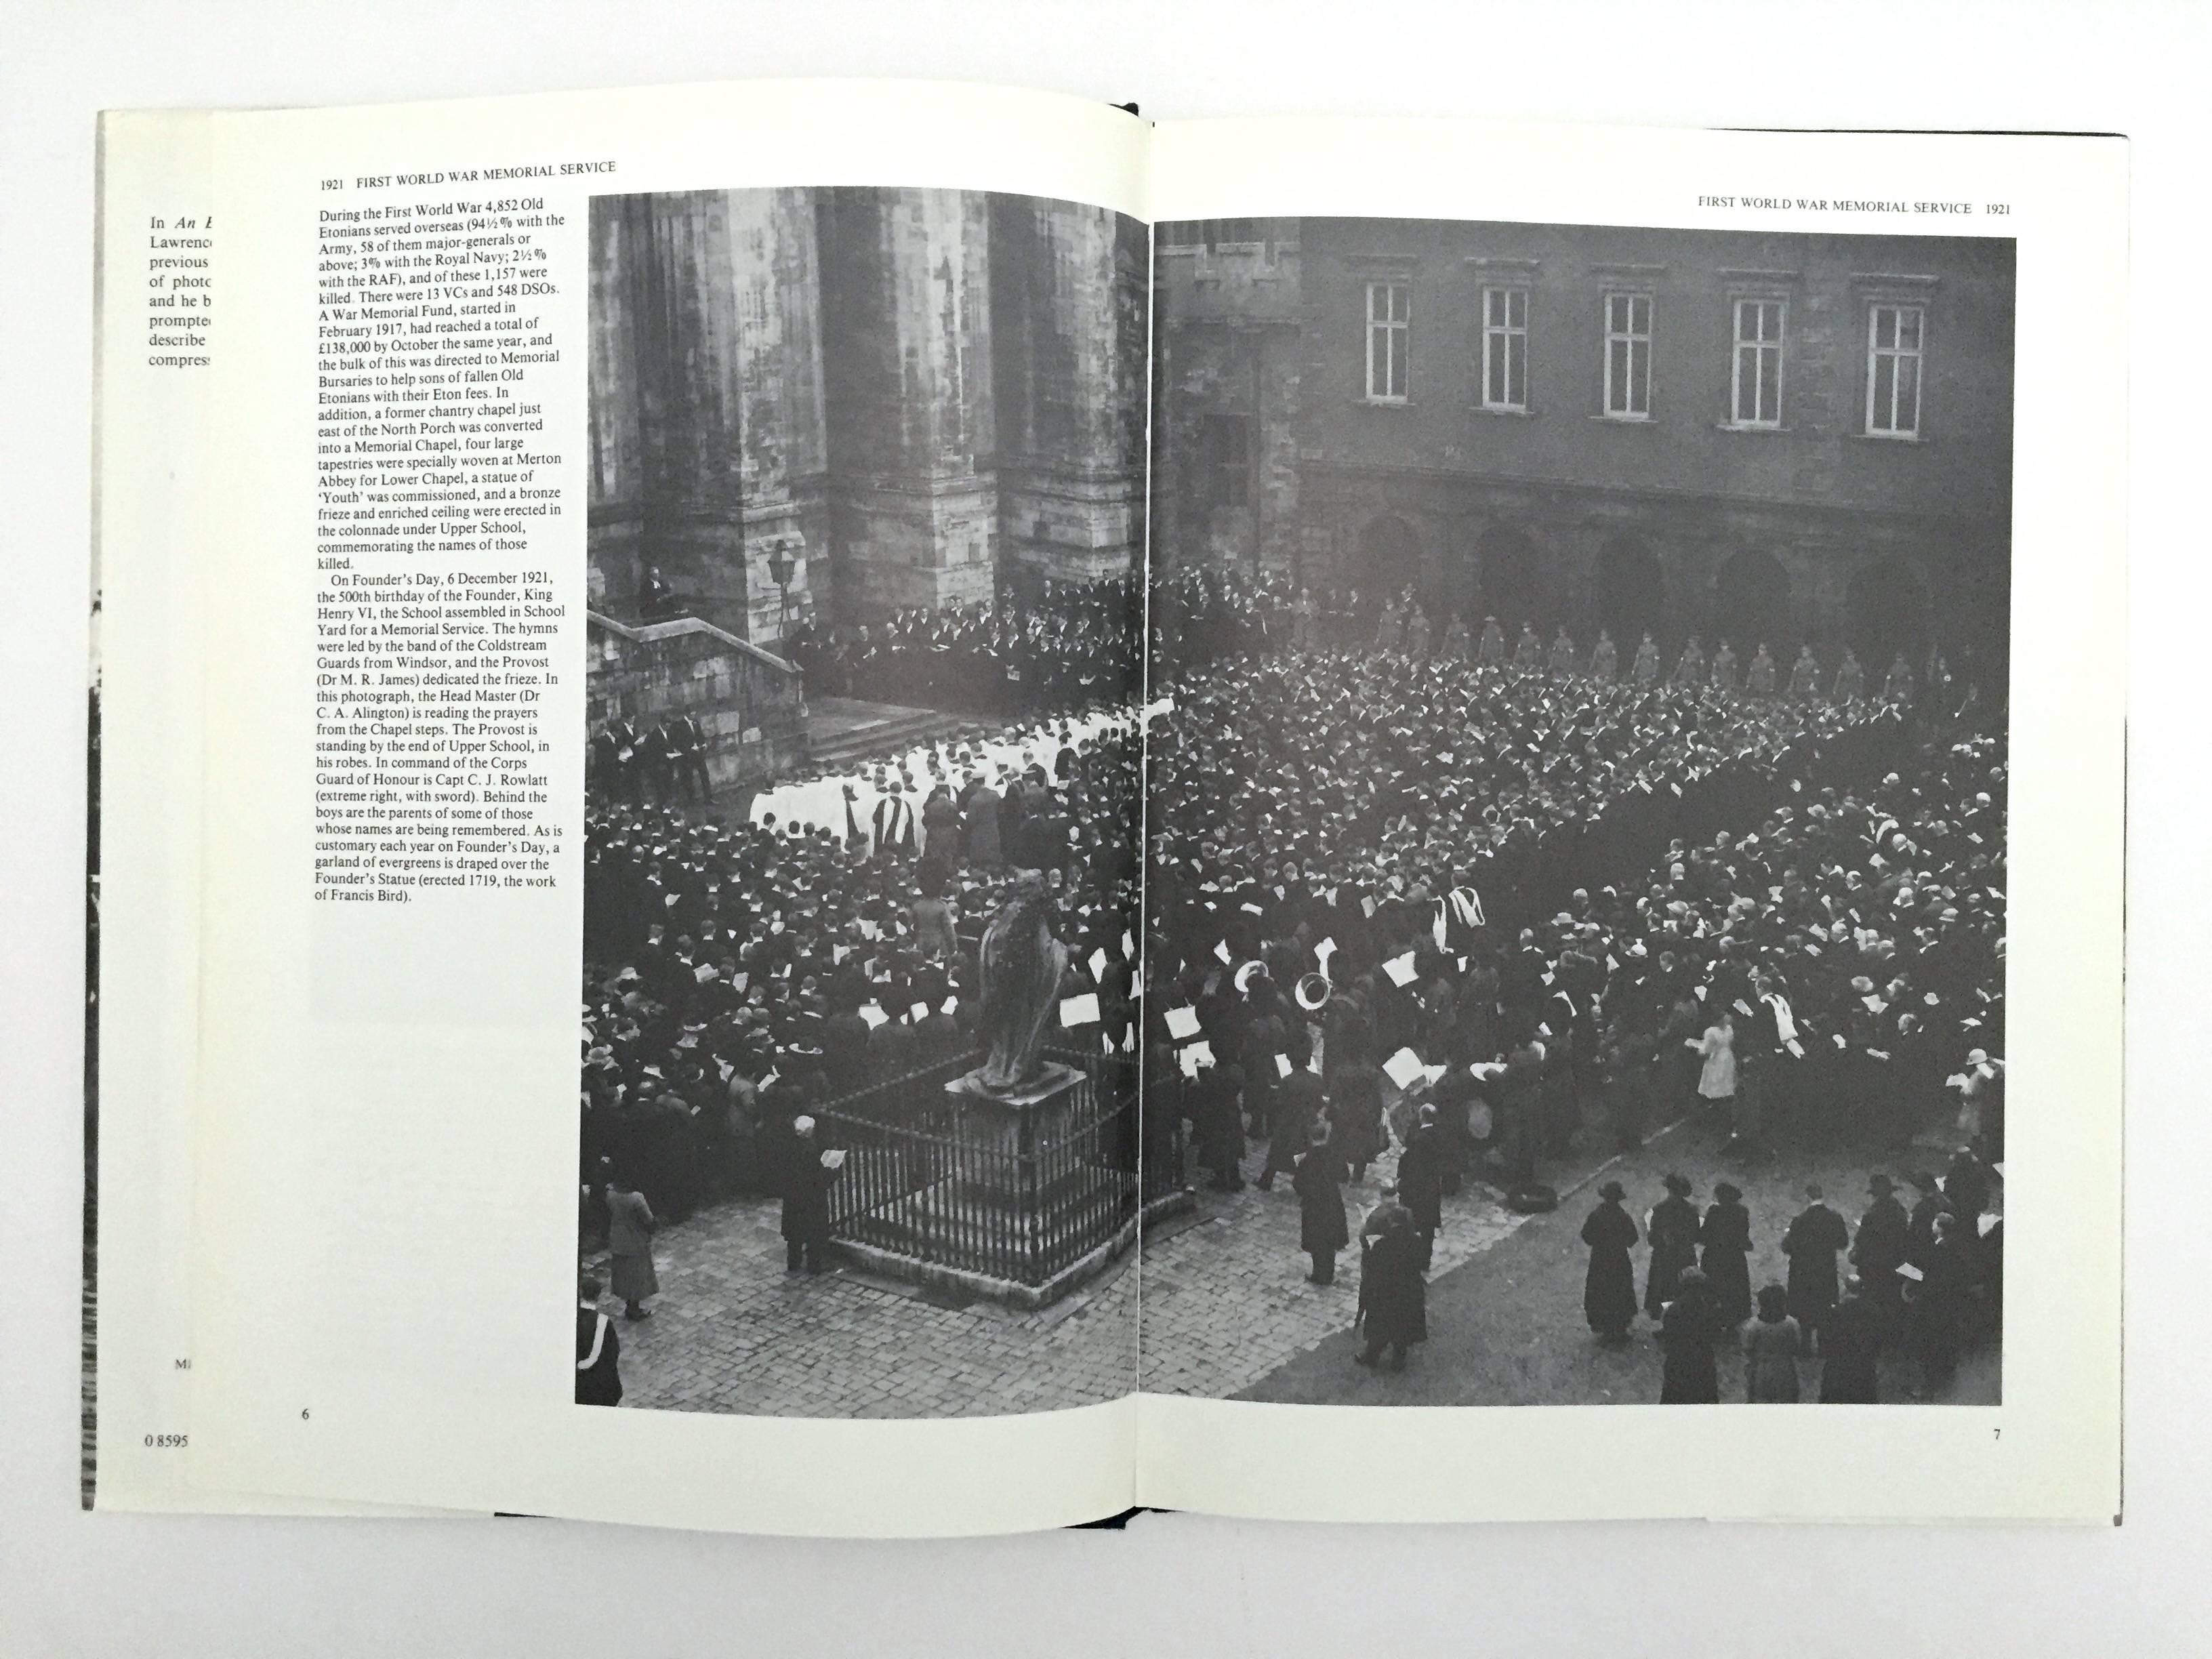 First edition, published by Michael Russell Publishing Ltd, 1983.

Written and compiled by P. S. H. Lawrence, an alumni and later master at Eton college. This book displays a plentiful archive of photographs documenting the building, surroundings